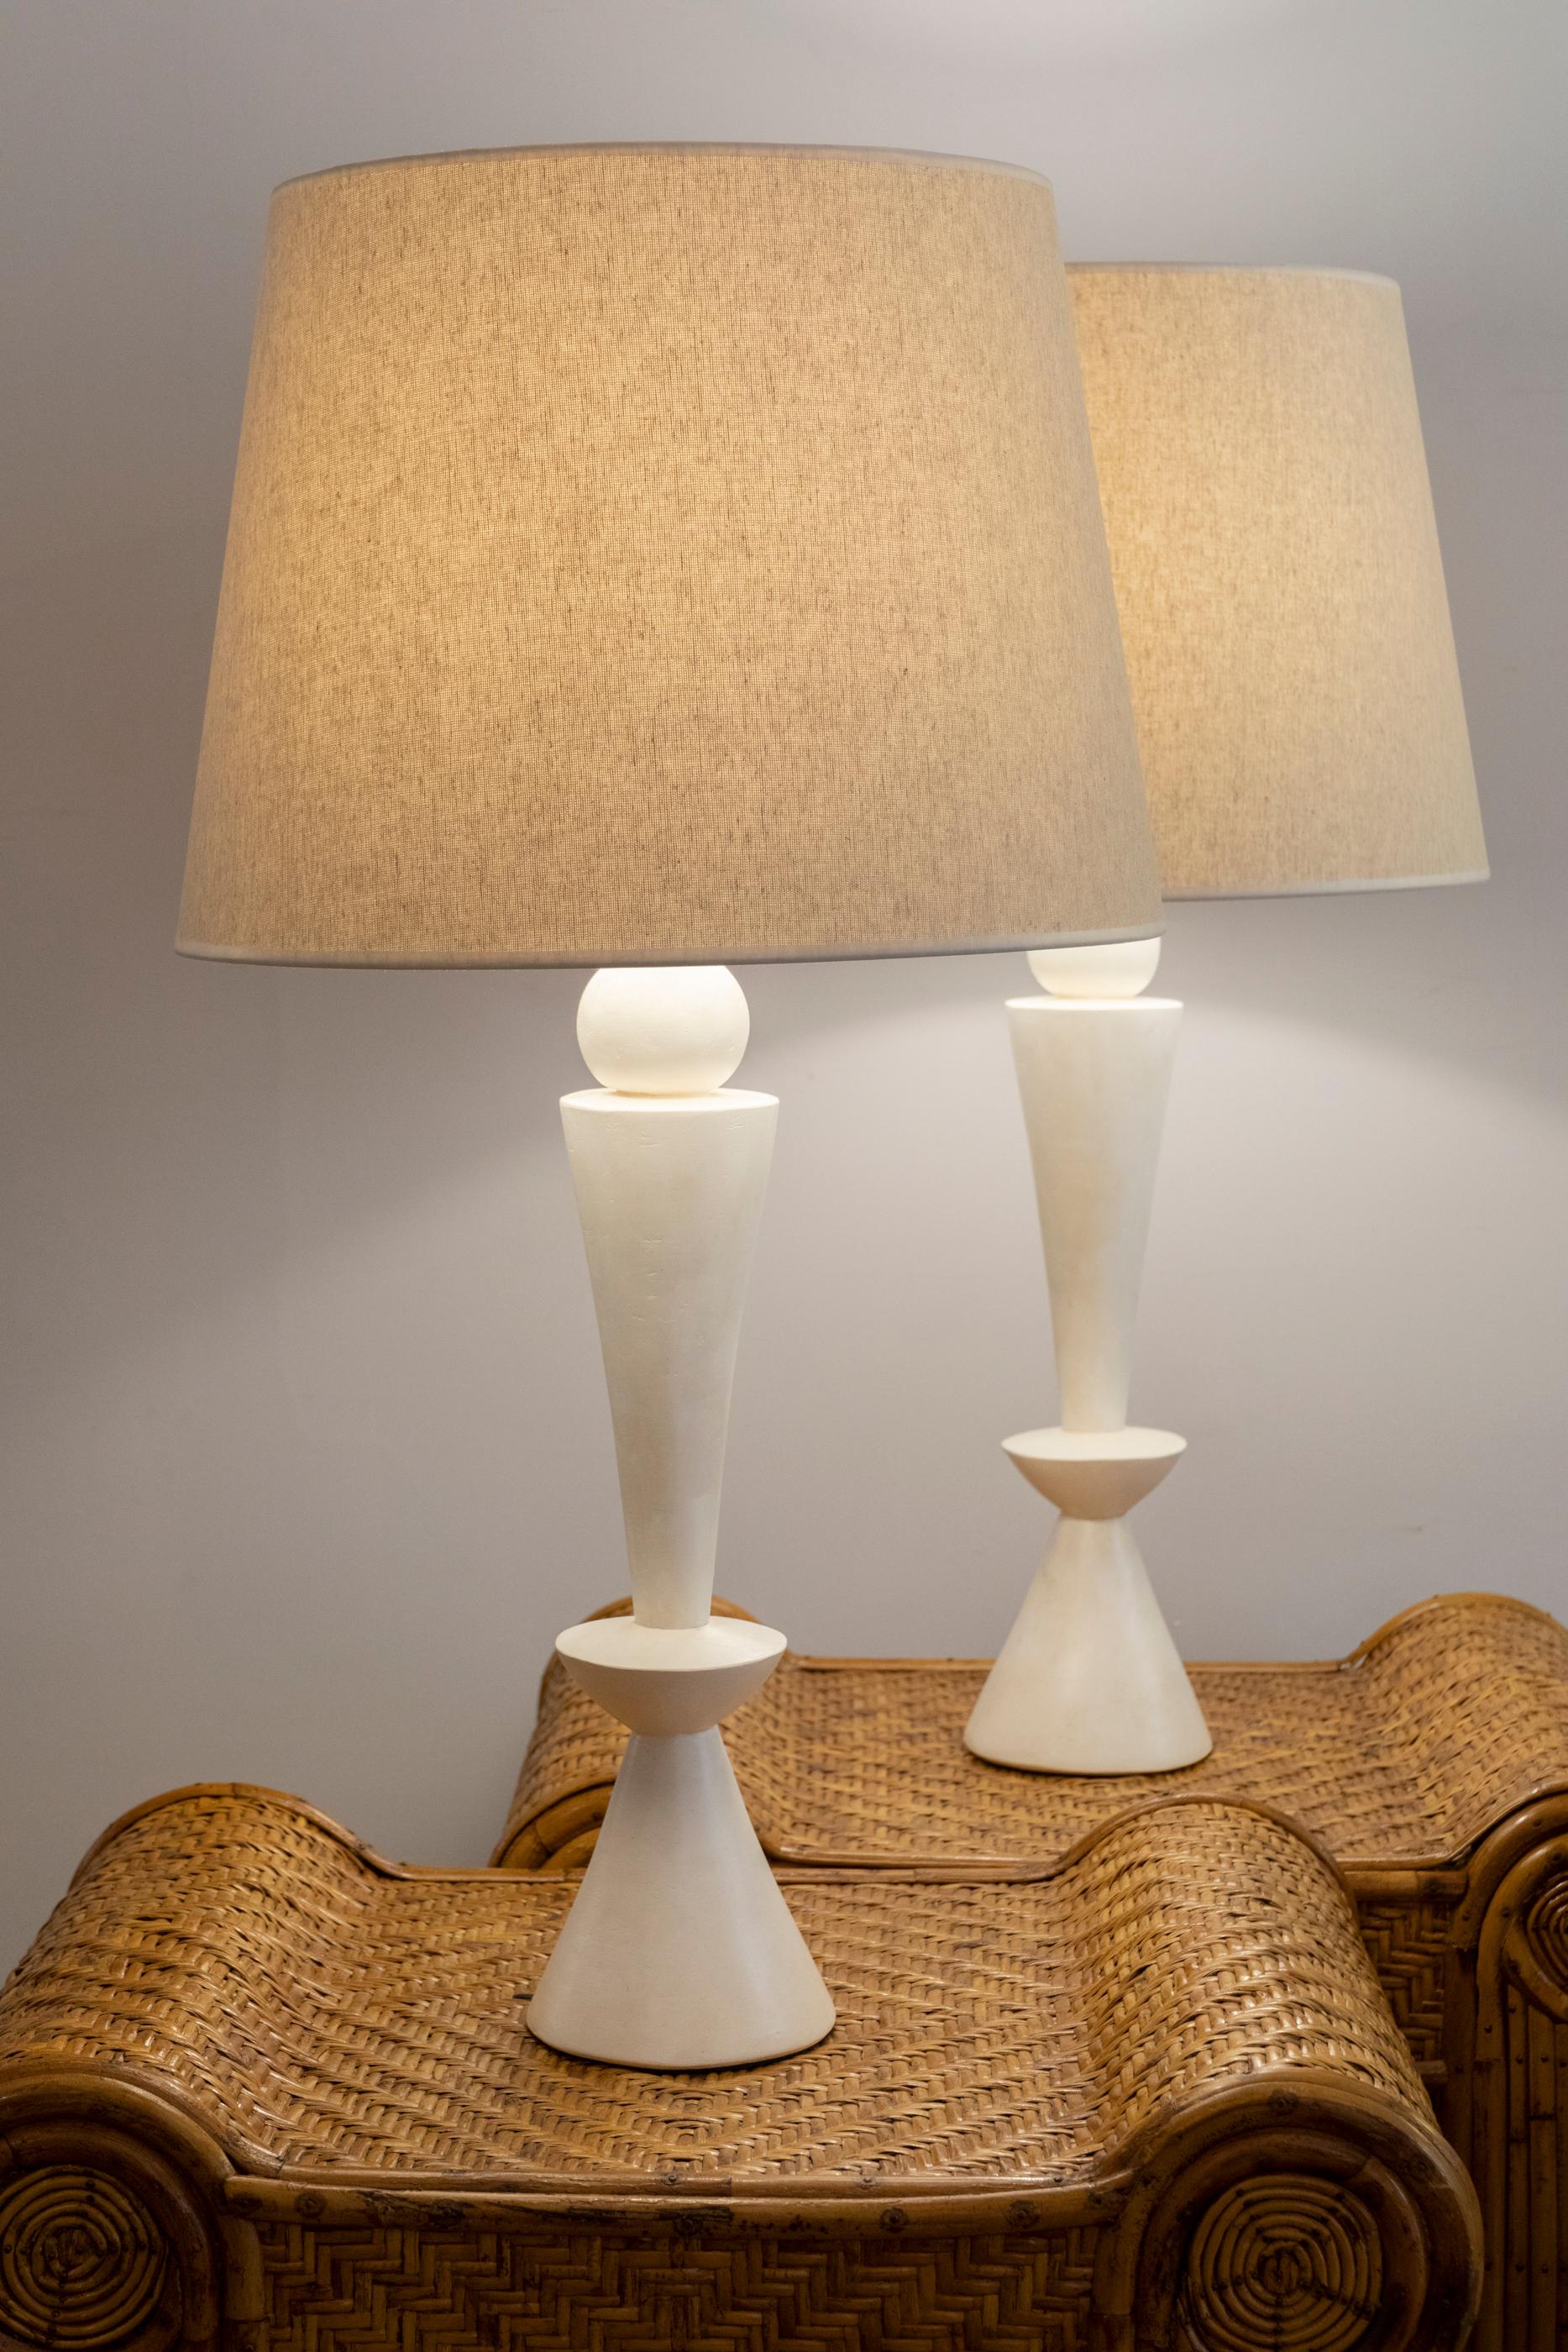 A pair of stuccoed plaster lamps.
France, contemporary creation.

Dimensions: 
Height total 86 cm (33.8 inches)
Height plaster foot 51 cm (20.1 inches)
Diameter 45 cm. (17.7 inches).
  